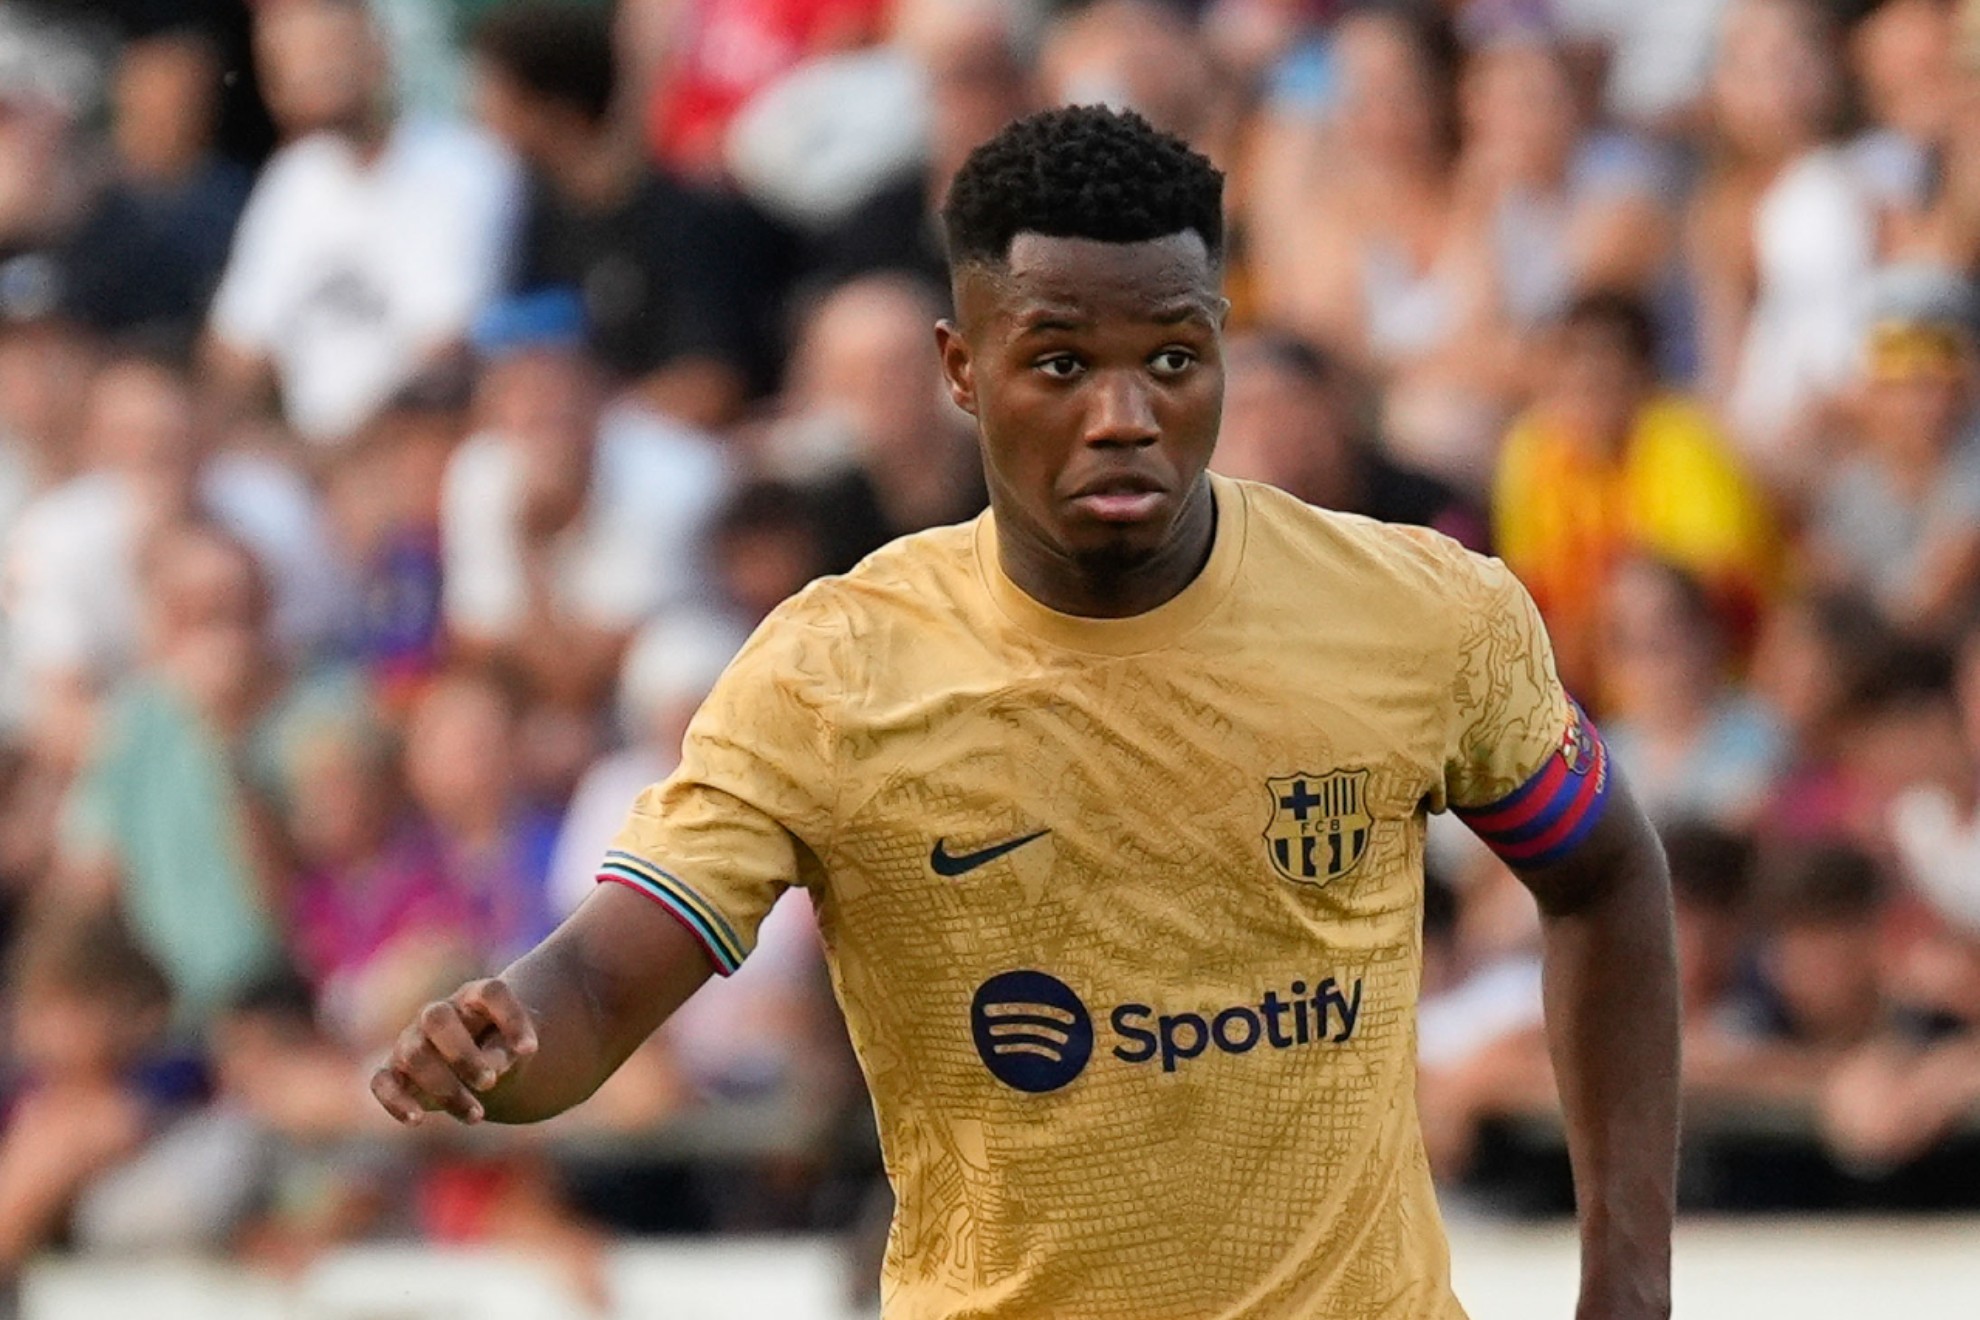 Barcelona: Ansu Fati strongly considers leaving FC Barcelona, with Chelsea  and Tottenham offers on the table